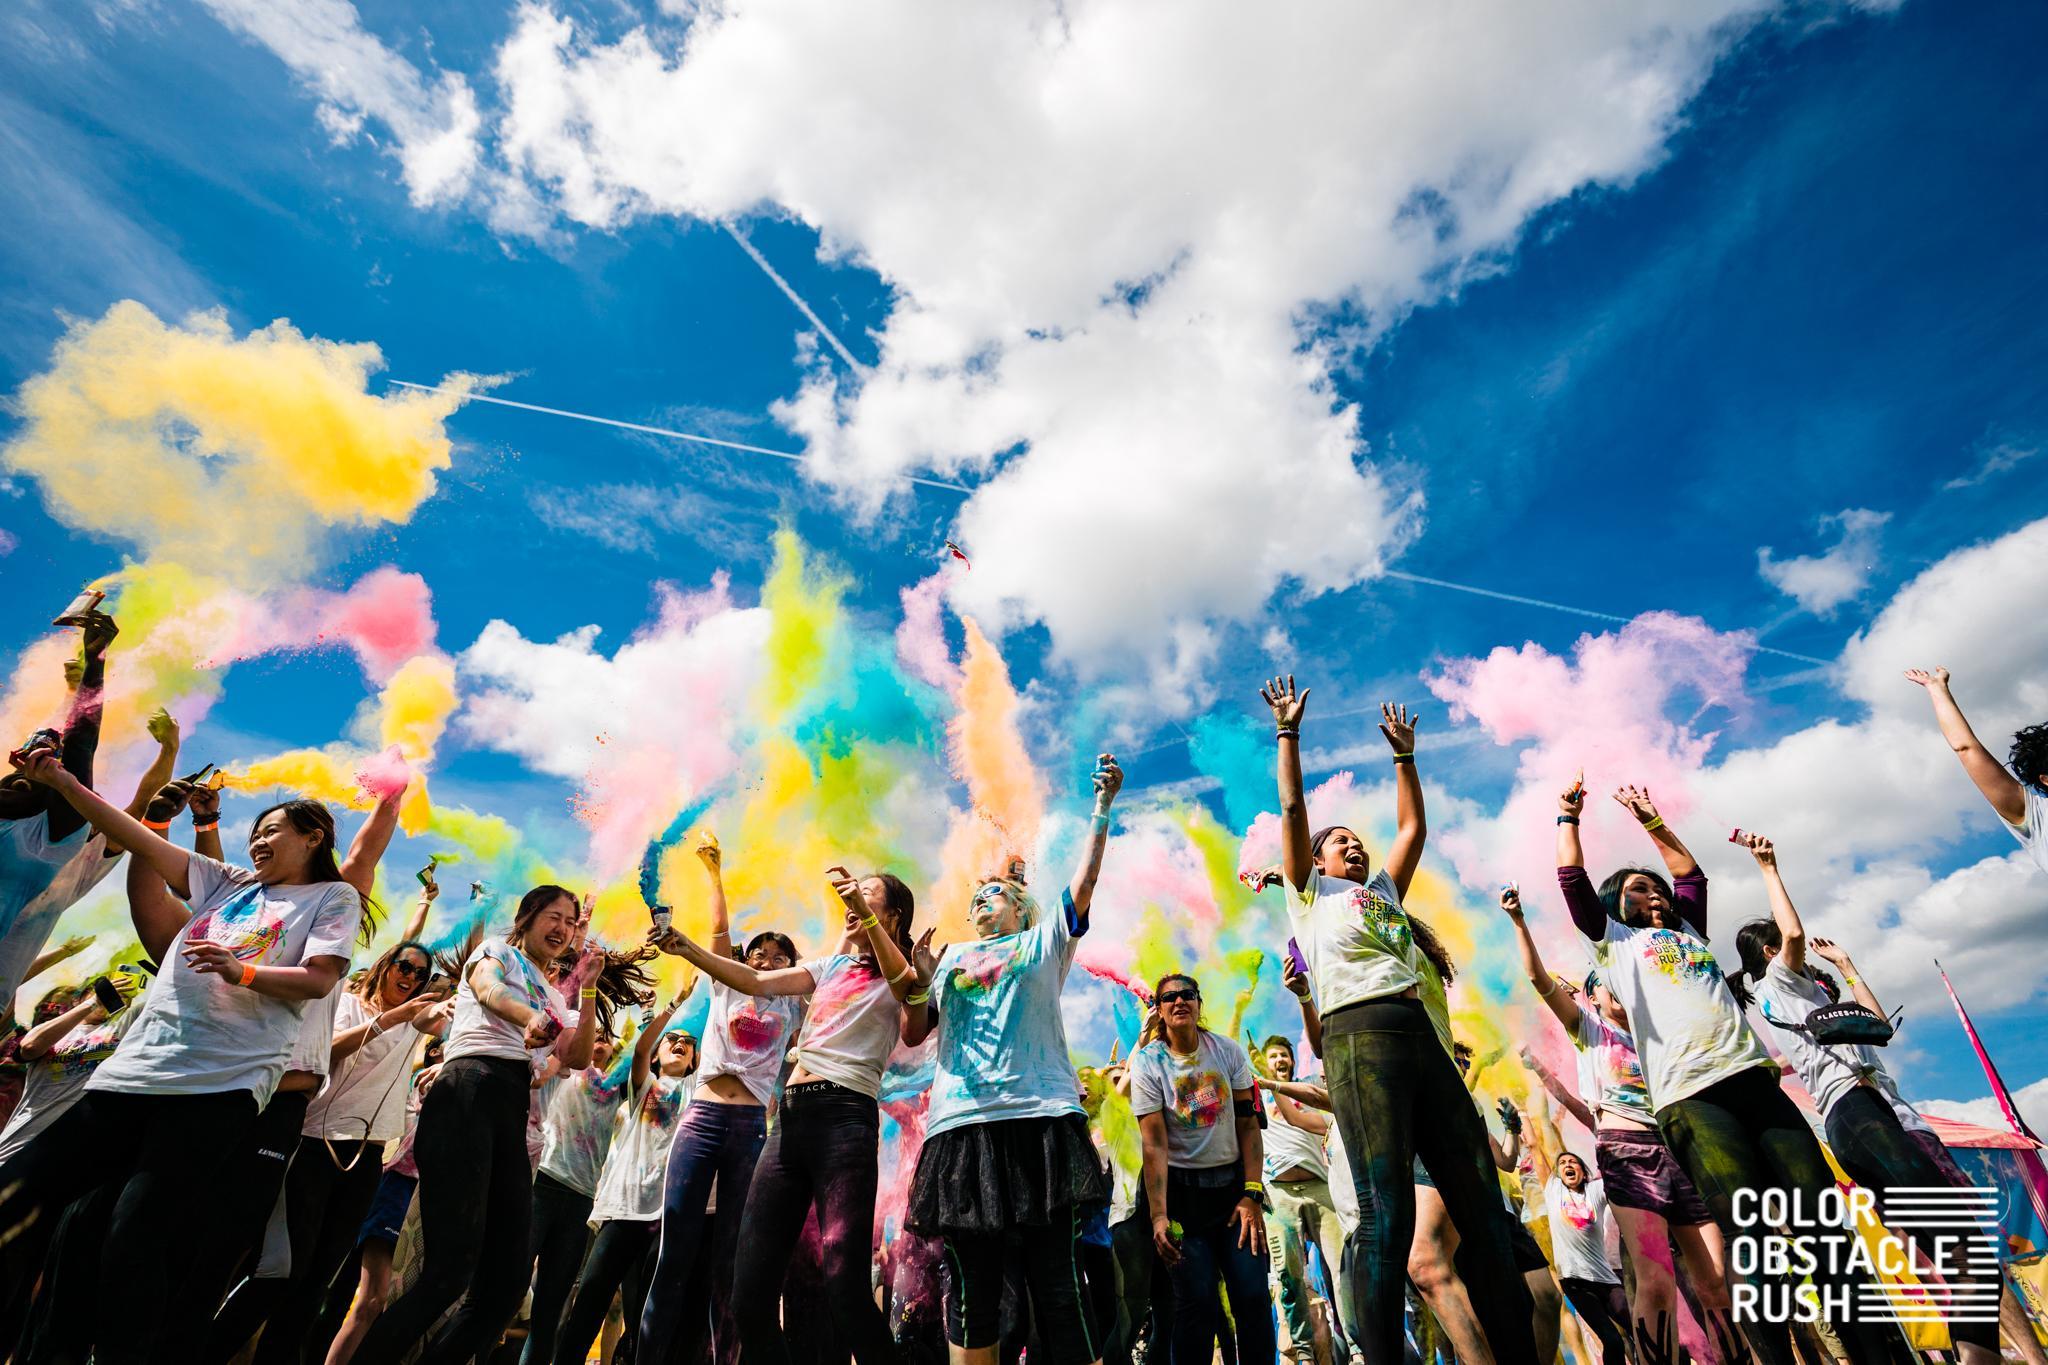 Join the CRT Team at the Color Obstacle Rush